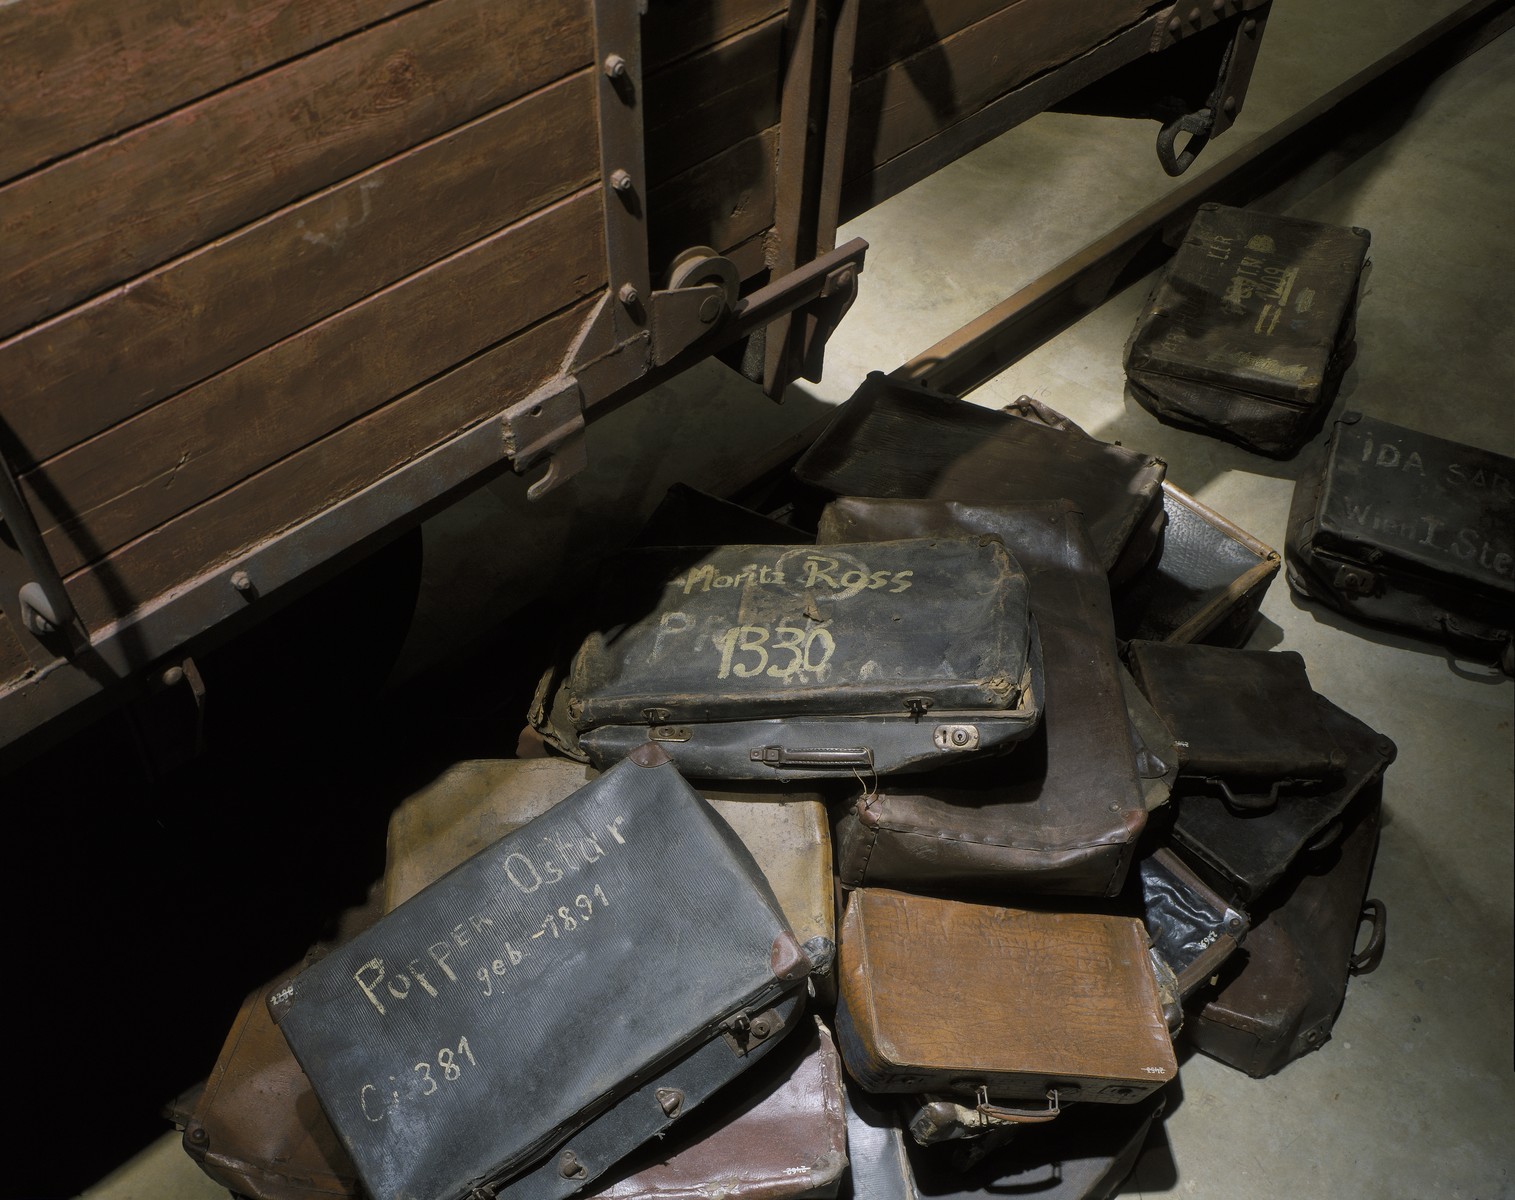 A collection of valises belonging to Jews who were deported to death camps, that are displayed at the base of the railcar on the third floor of the permanent exhibition at the U.S. Holocaust Memorial Museum.